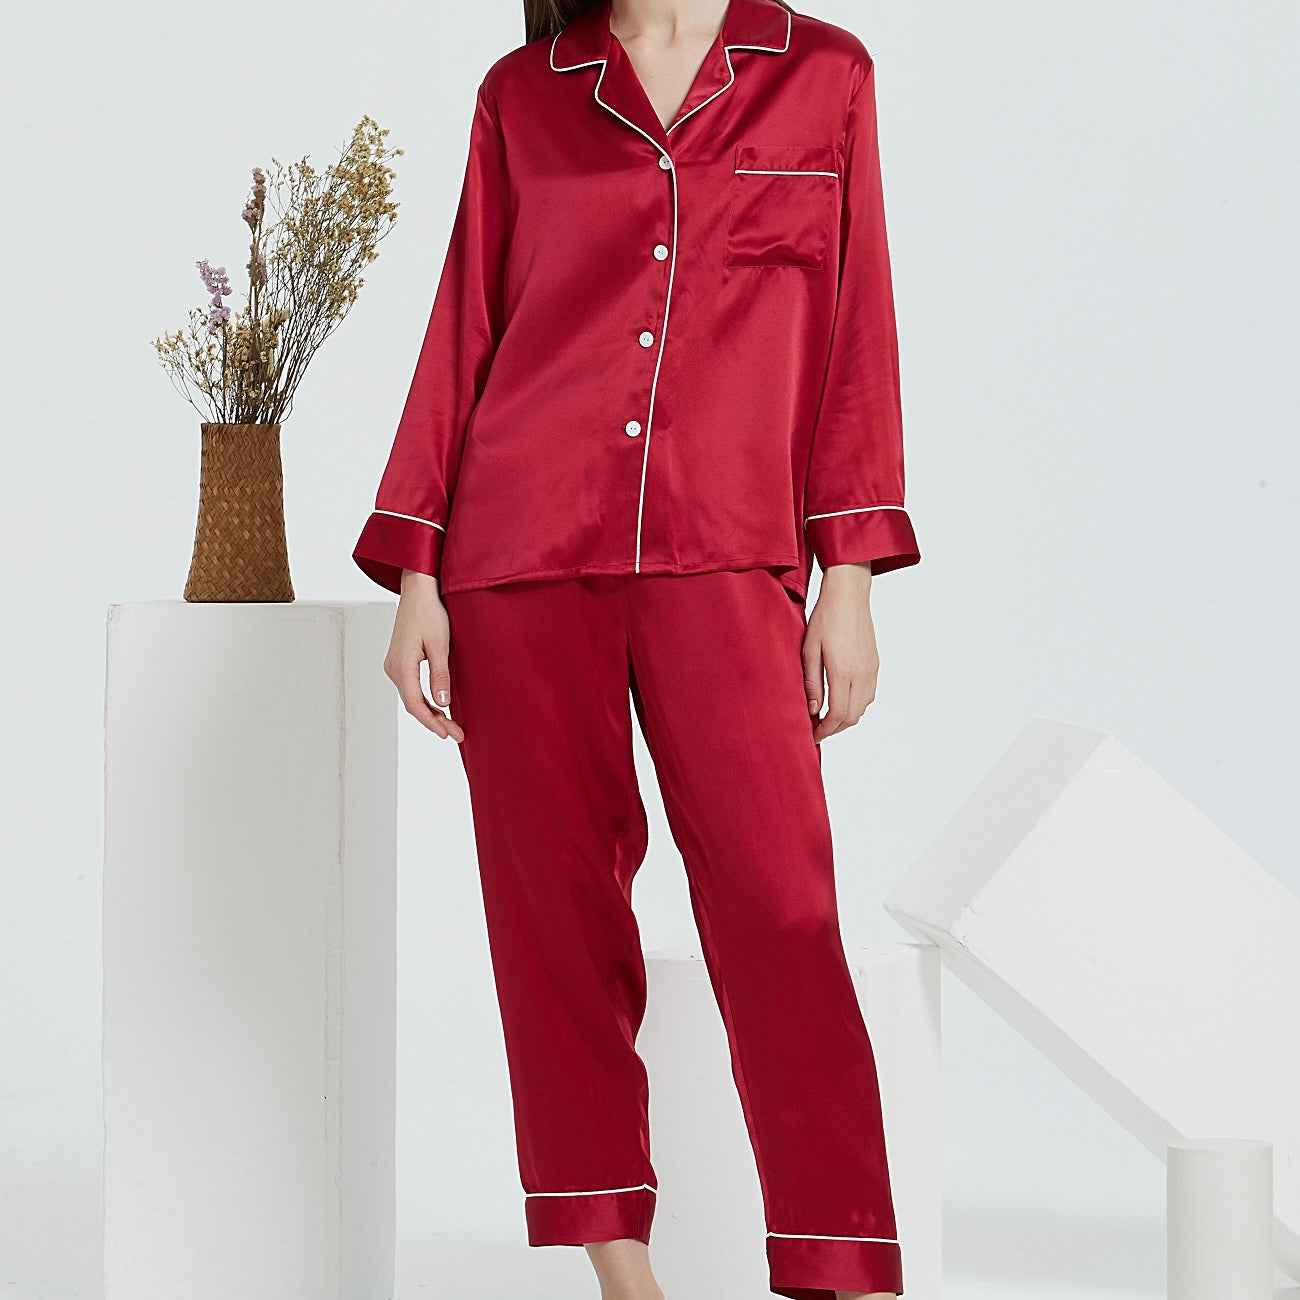 Home to the best mulberry silk products in Singapore, White Trousseau’s silk sleepwear sets are suitable for sensitive, dry, itchy skin, and will help you get some much-needed beauty sleep!